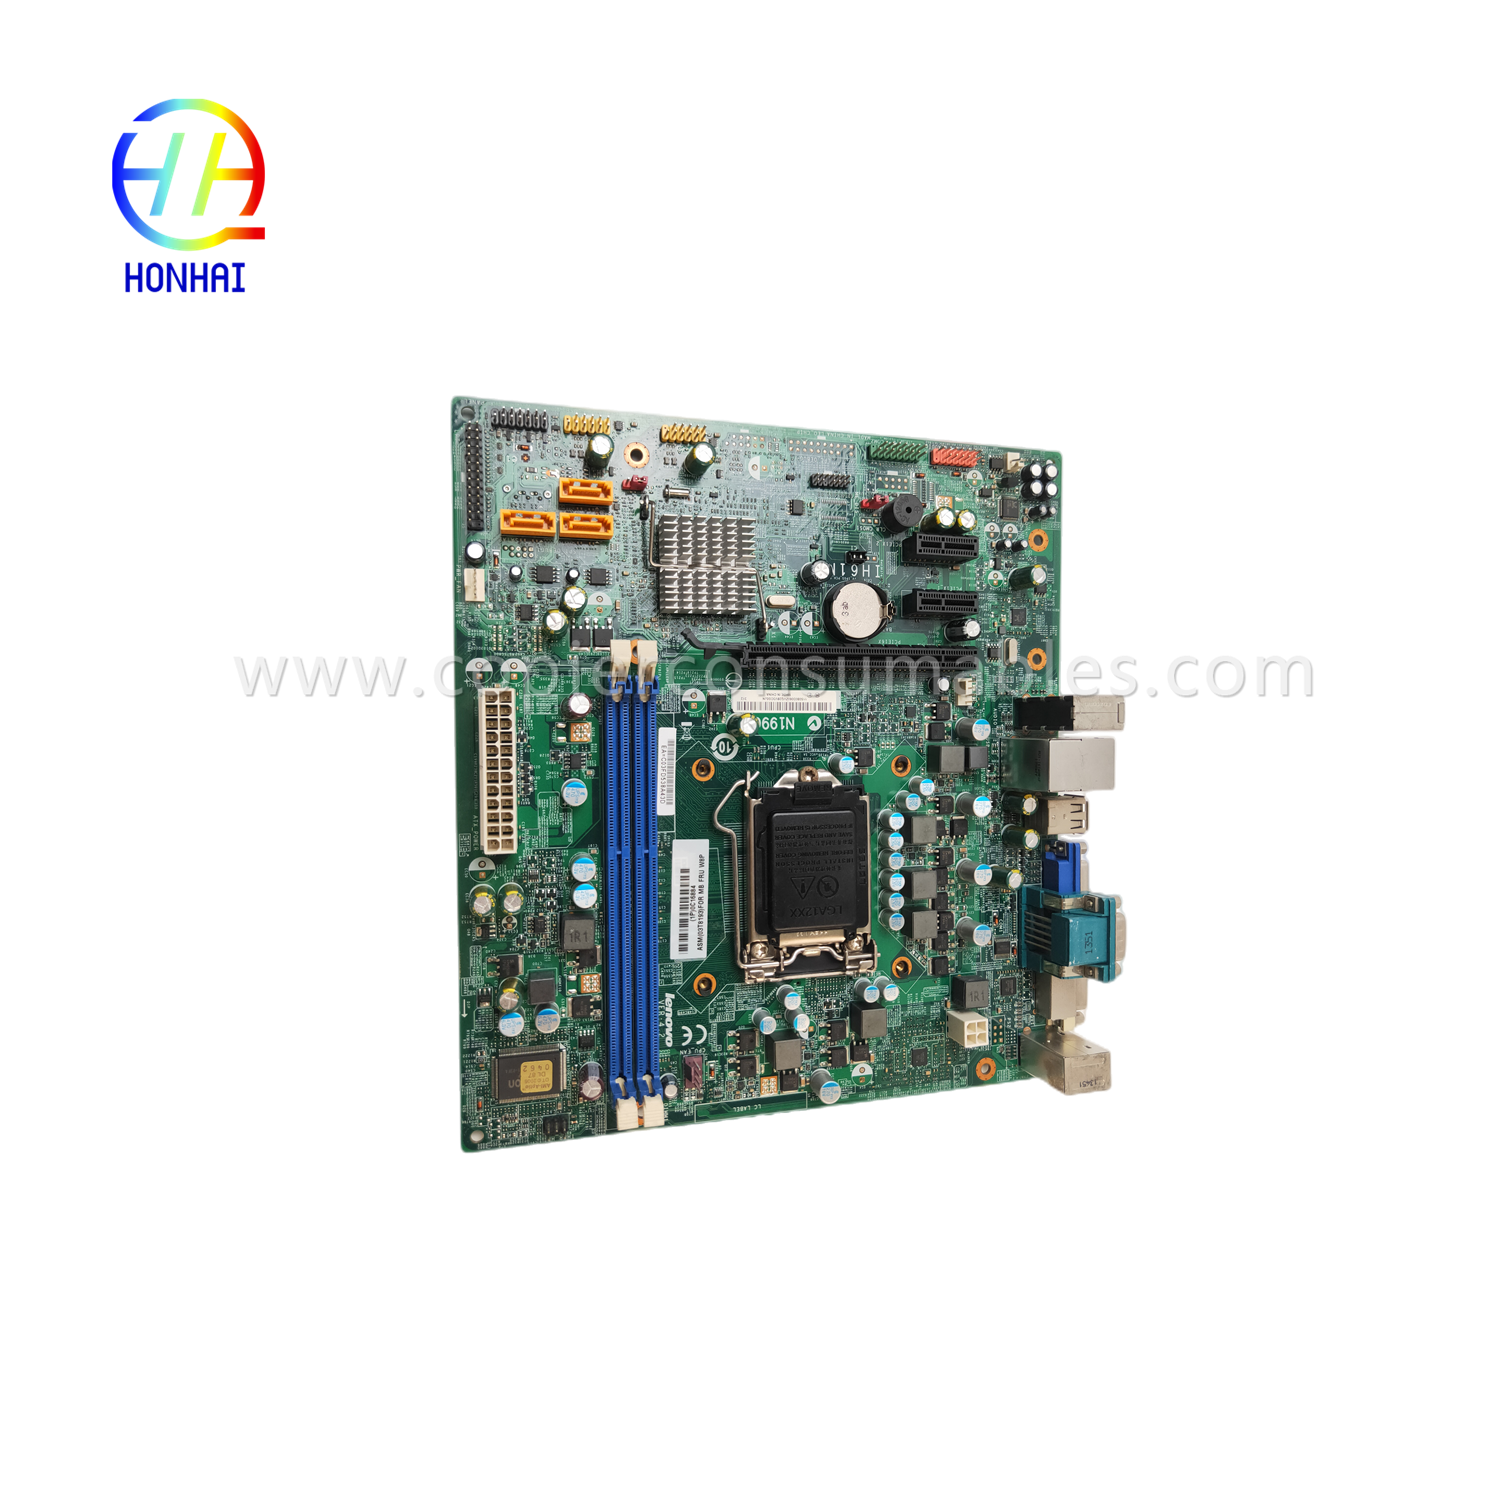 https://c585.goodao.net/otherboard-for-lenovo-thinkcentre-m72e-lga-1155-03t8193-system-board-product/